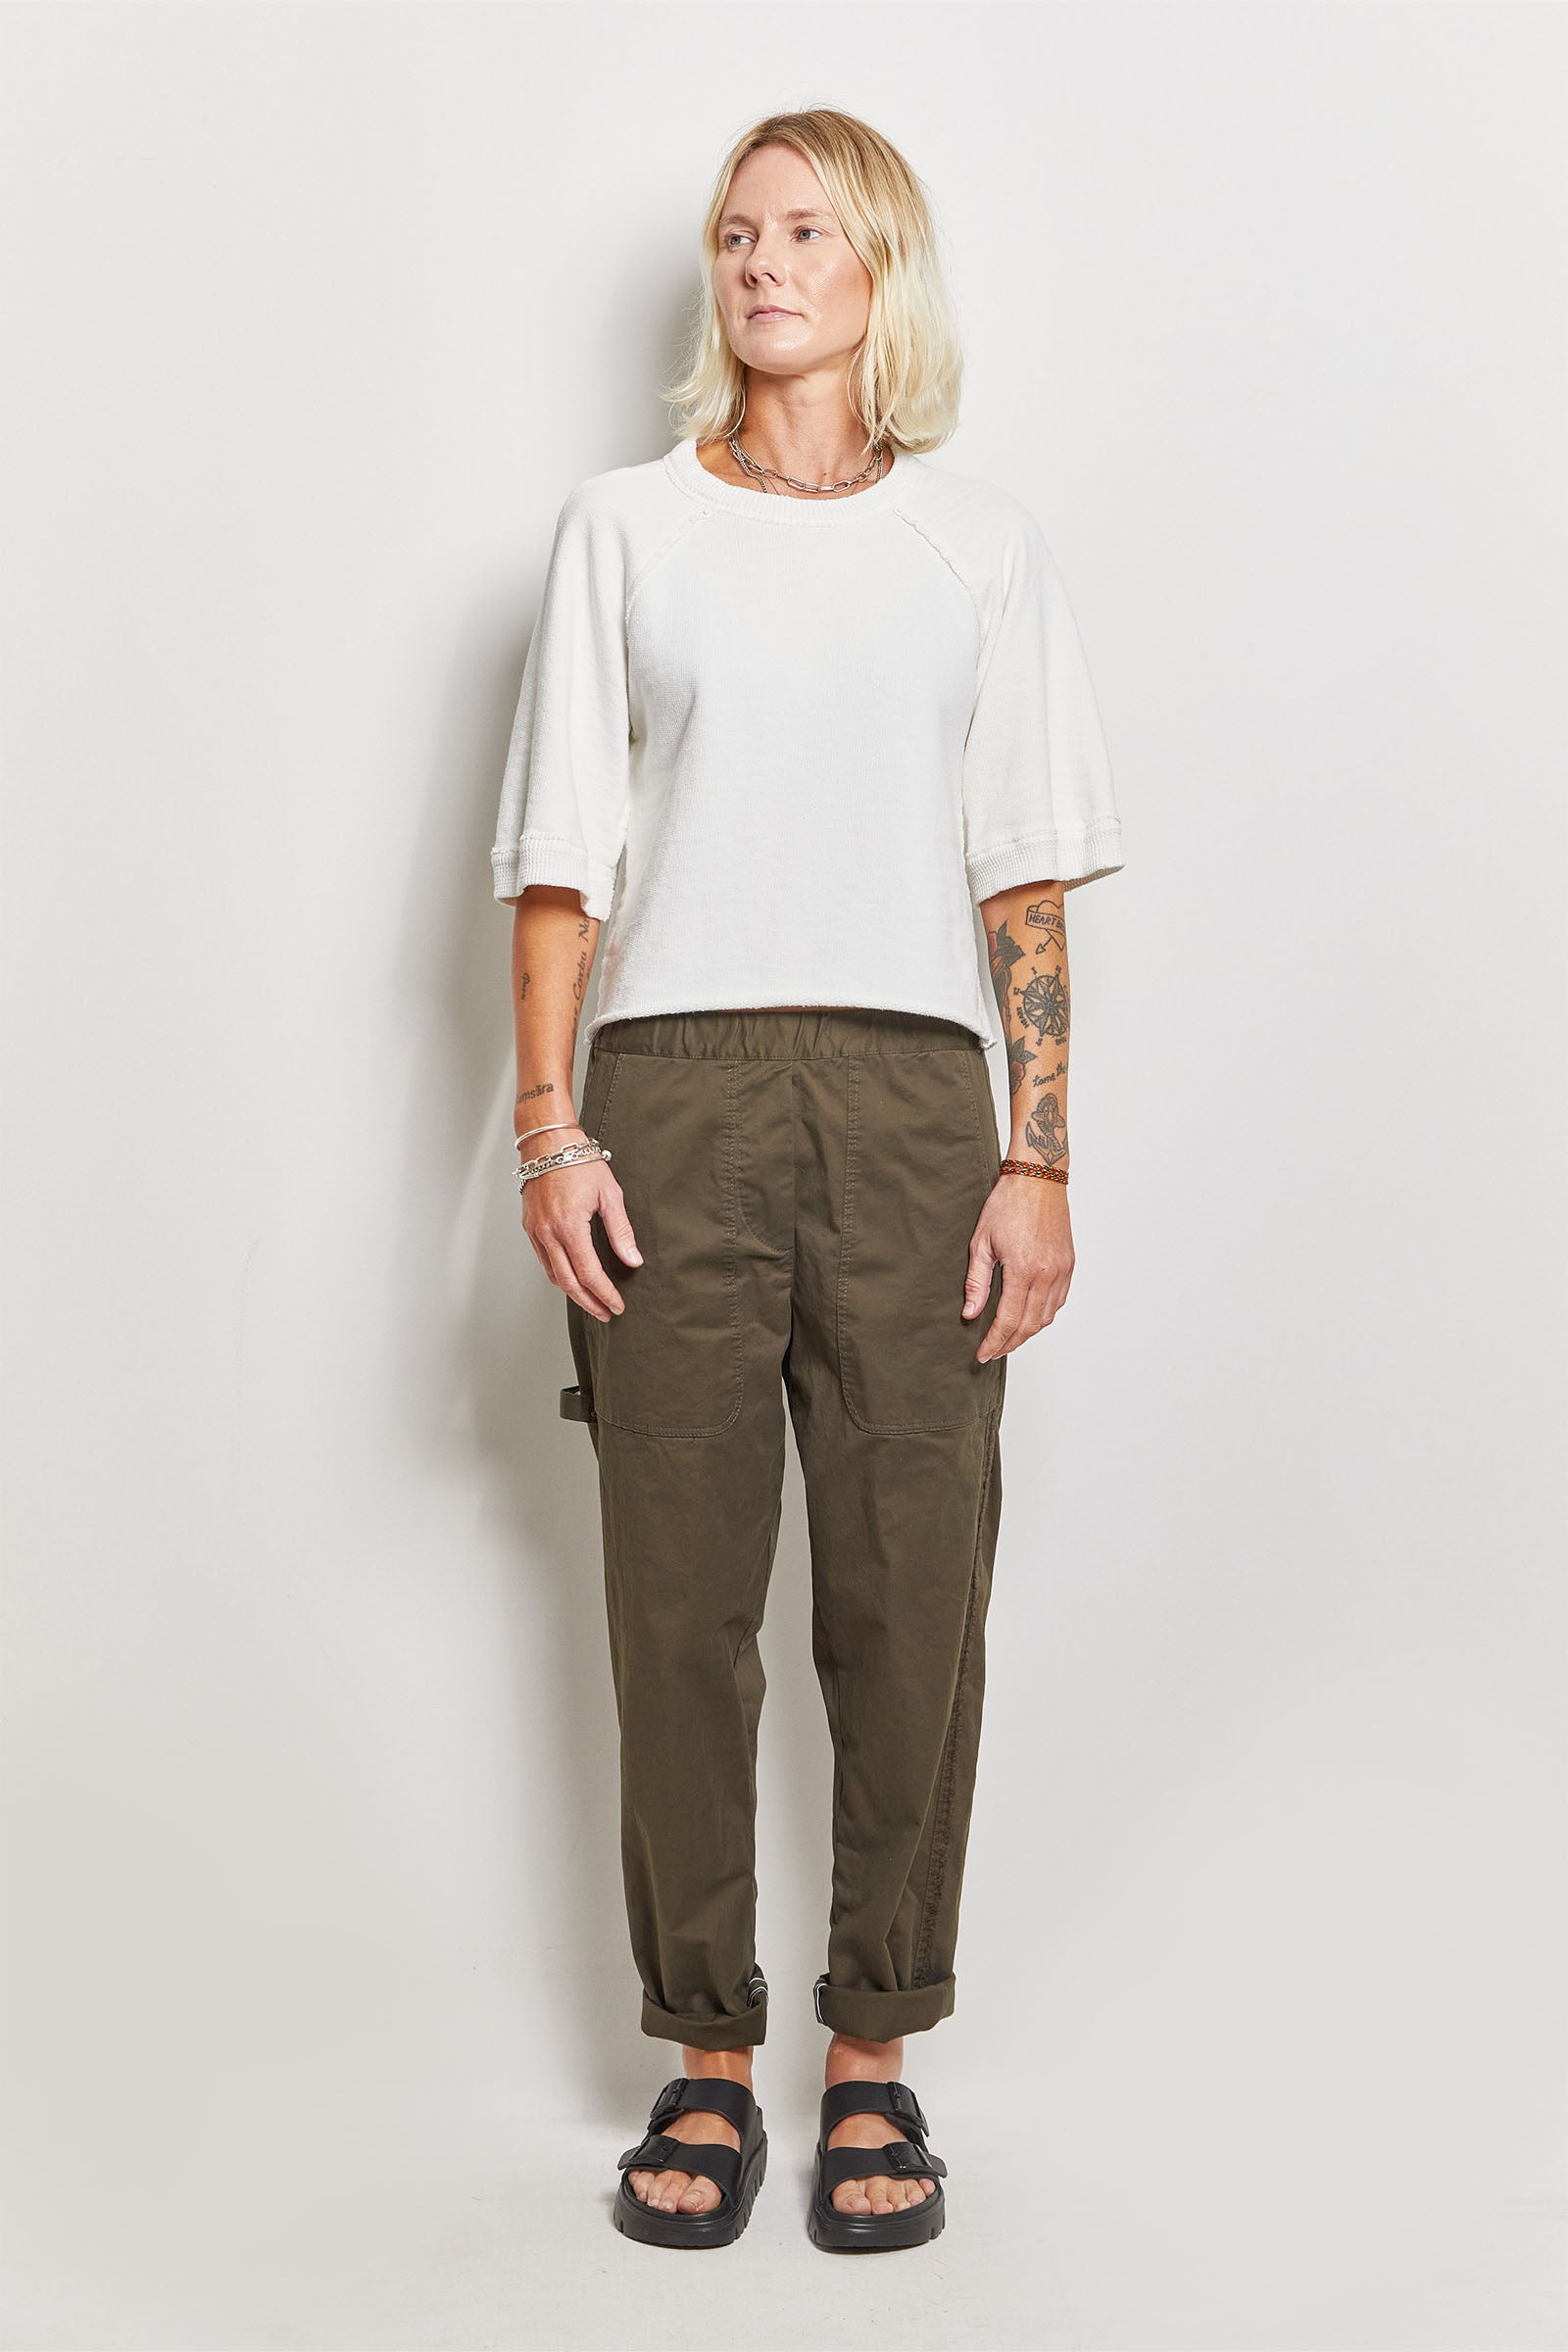 byfreer cotton twill dax cargo pant.